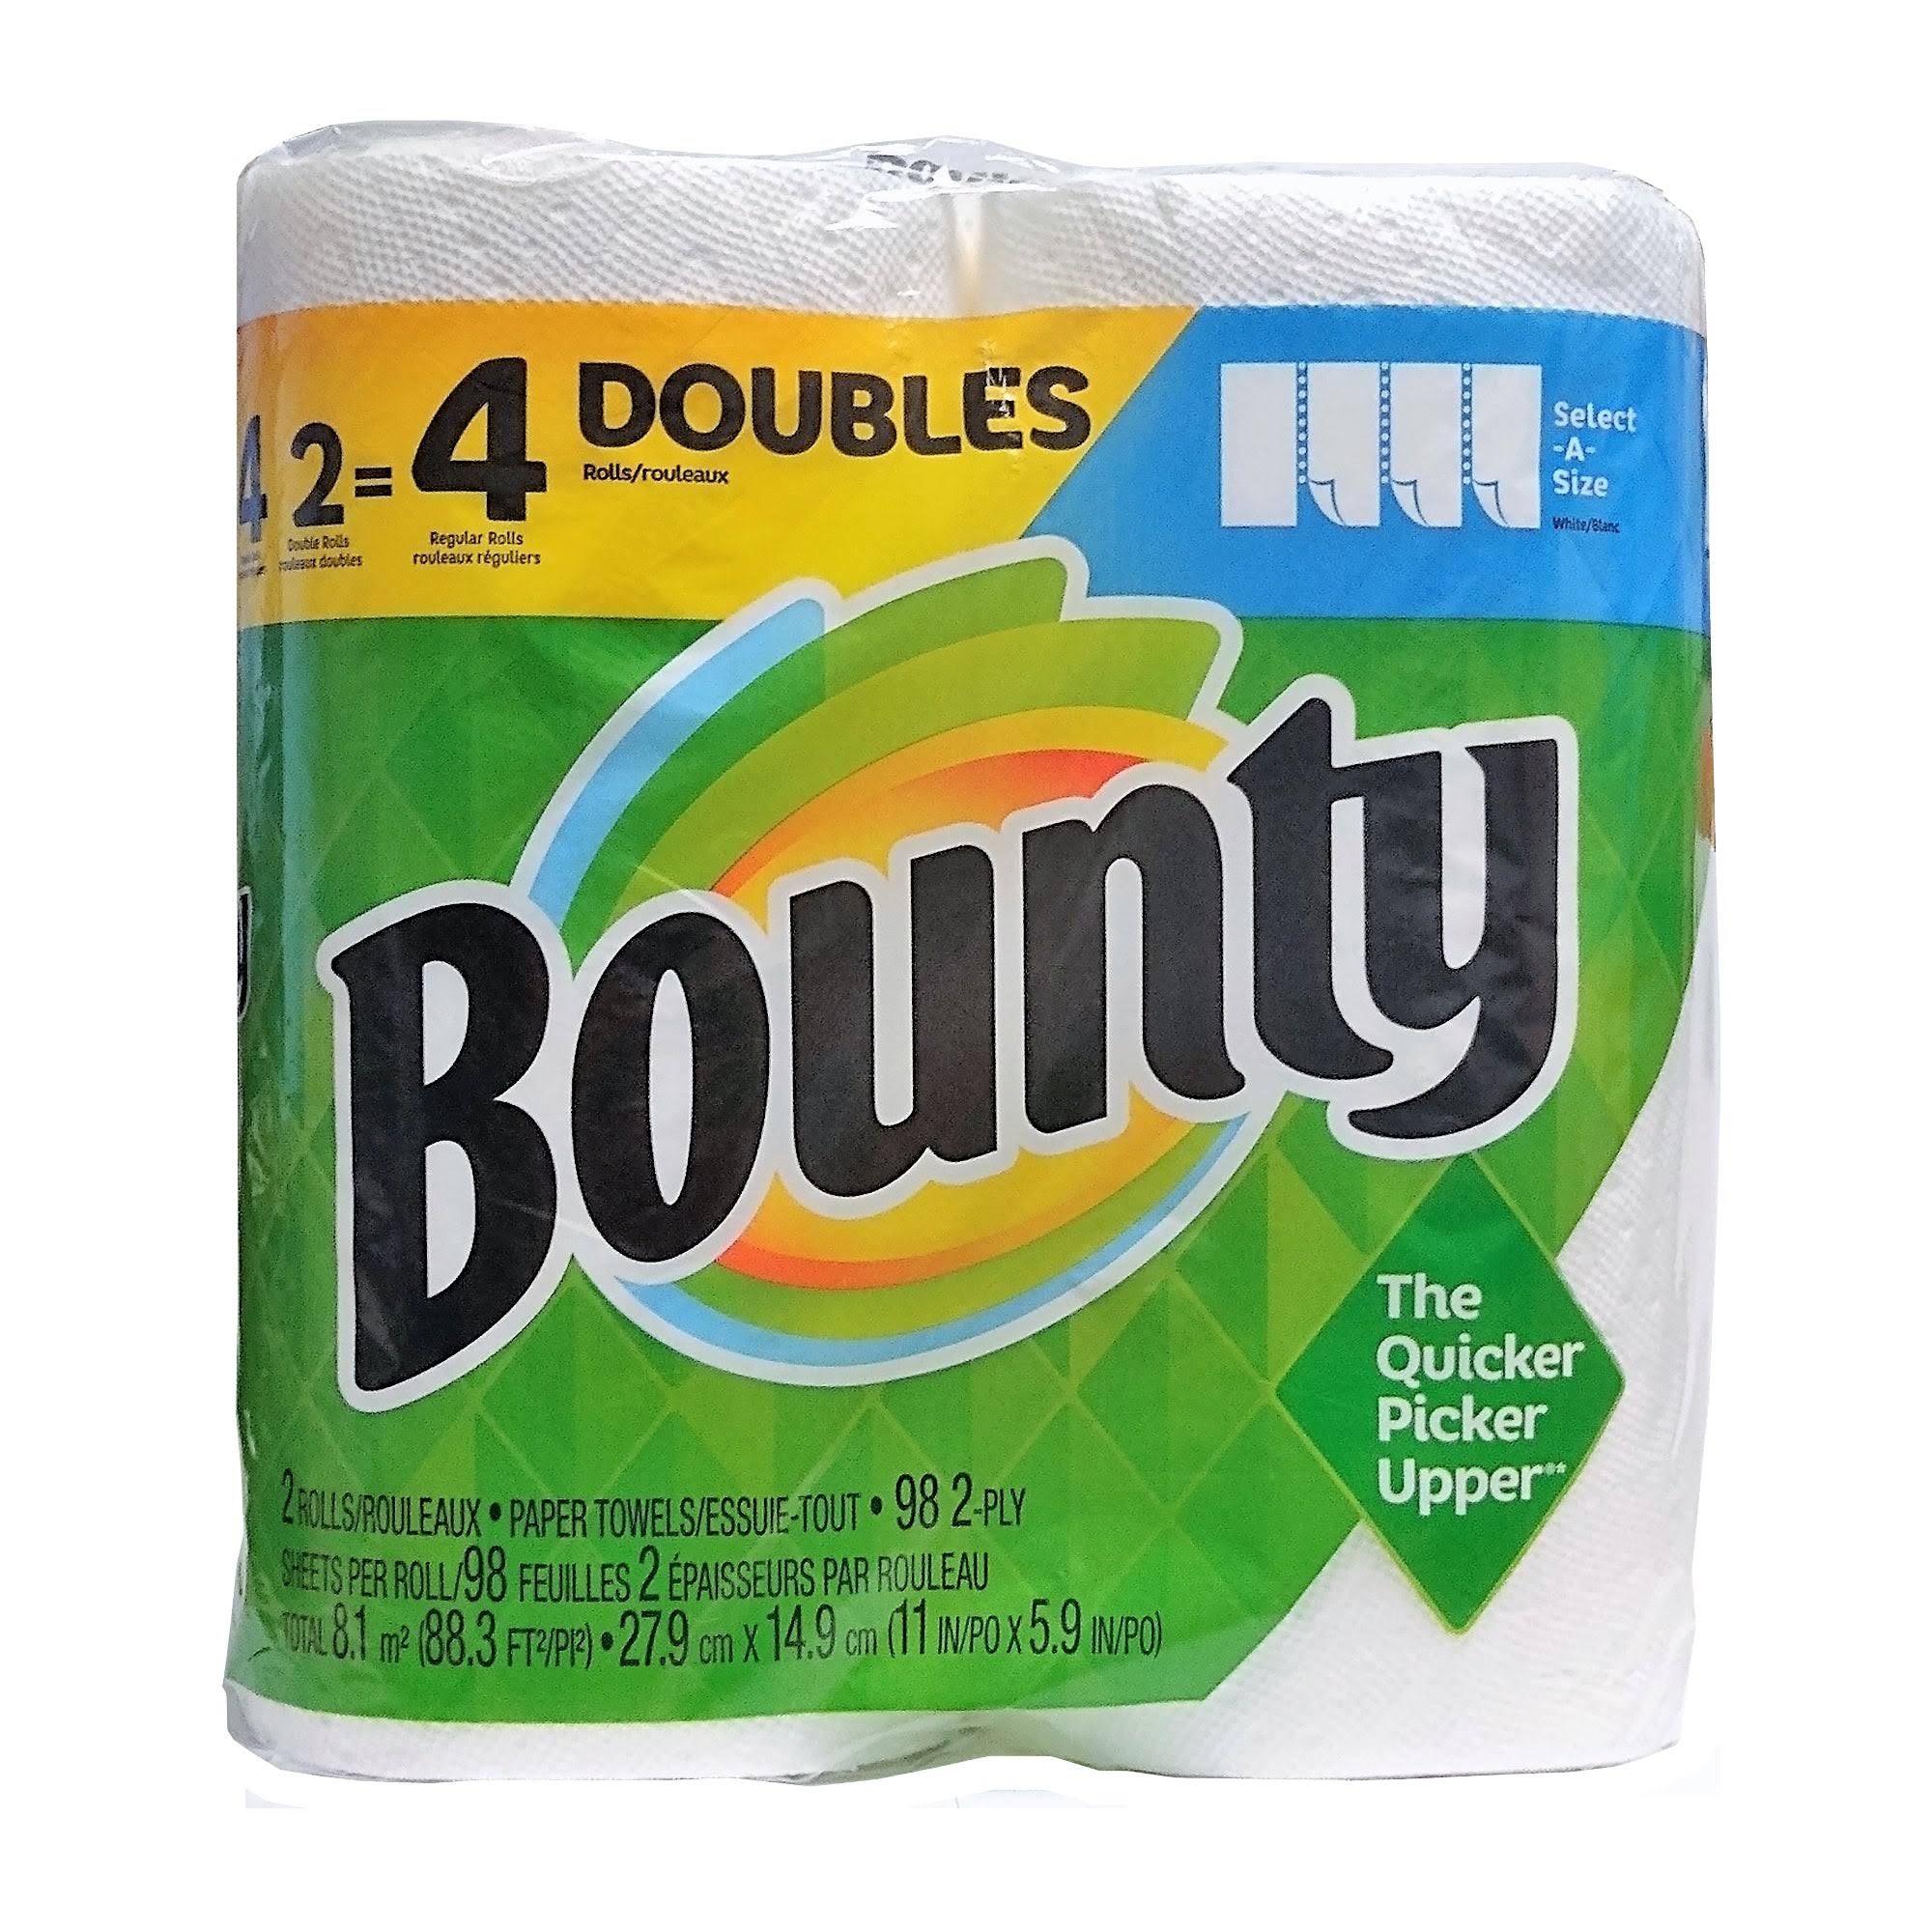 Bounty Paper Towels, White, Select-A-Size, Double Rolls, 2-Ply - 2 rolls